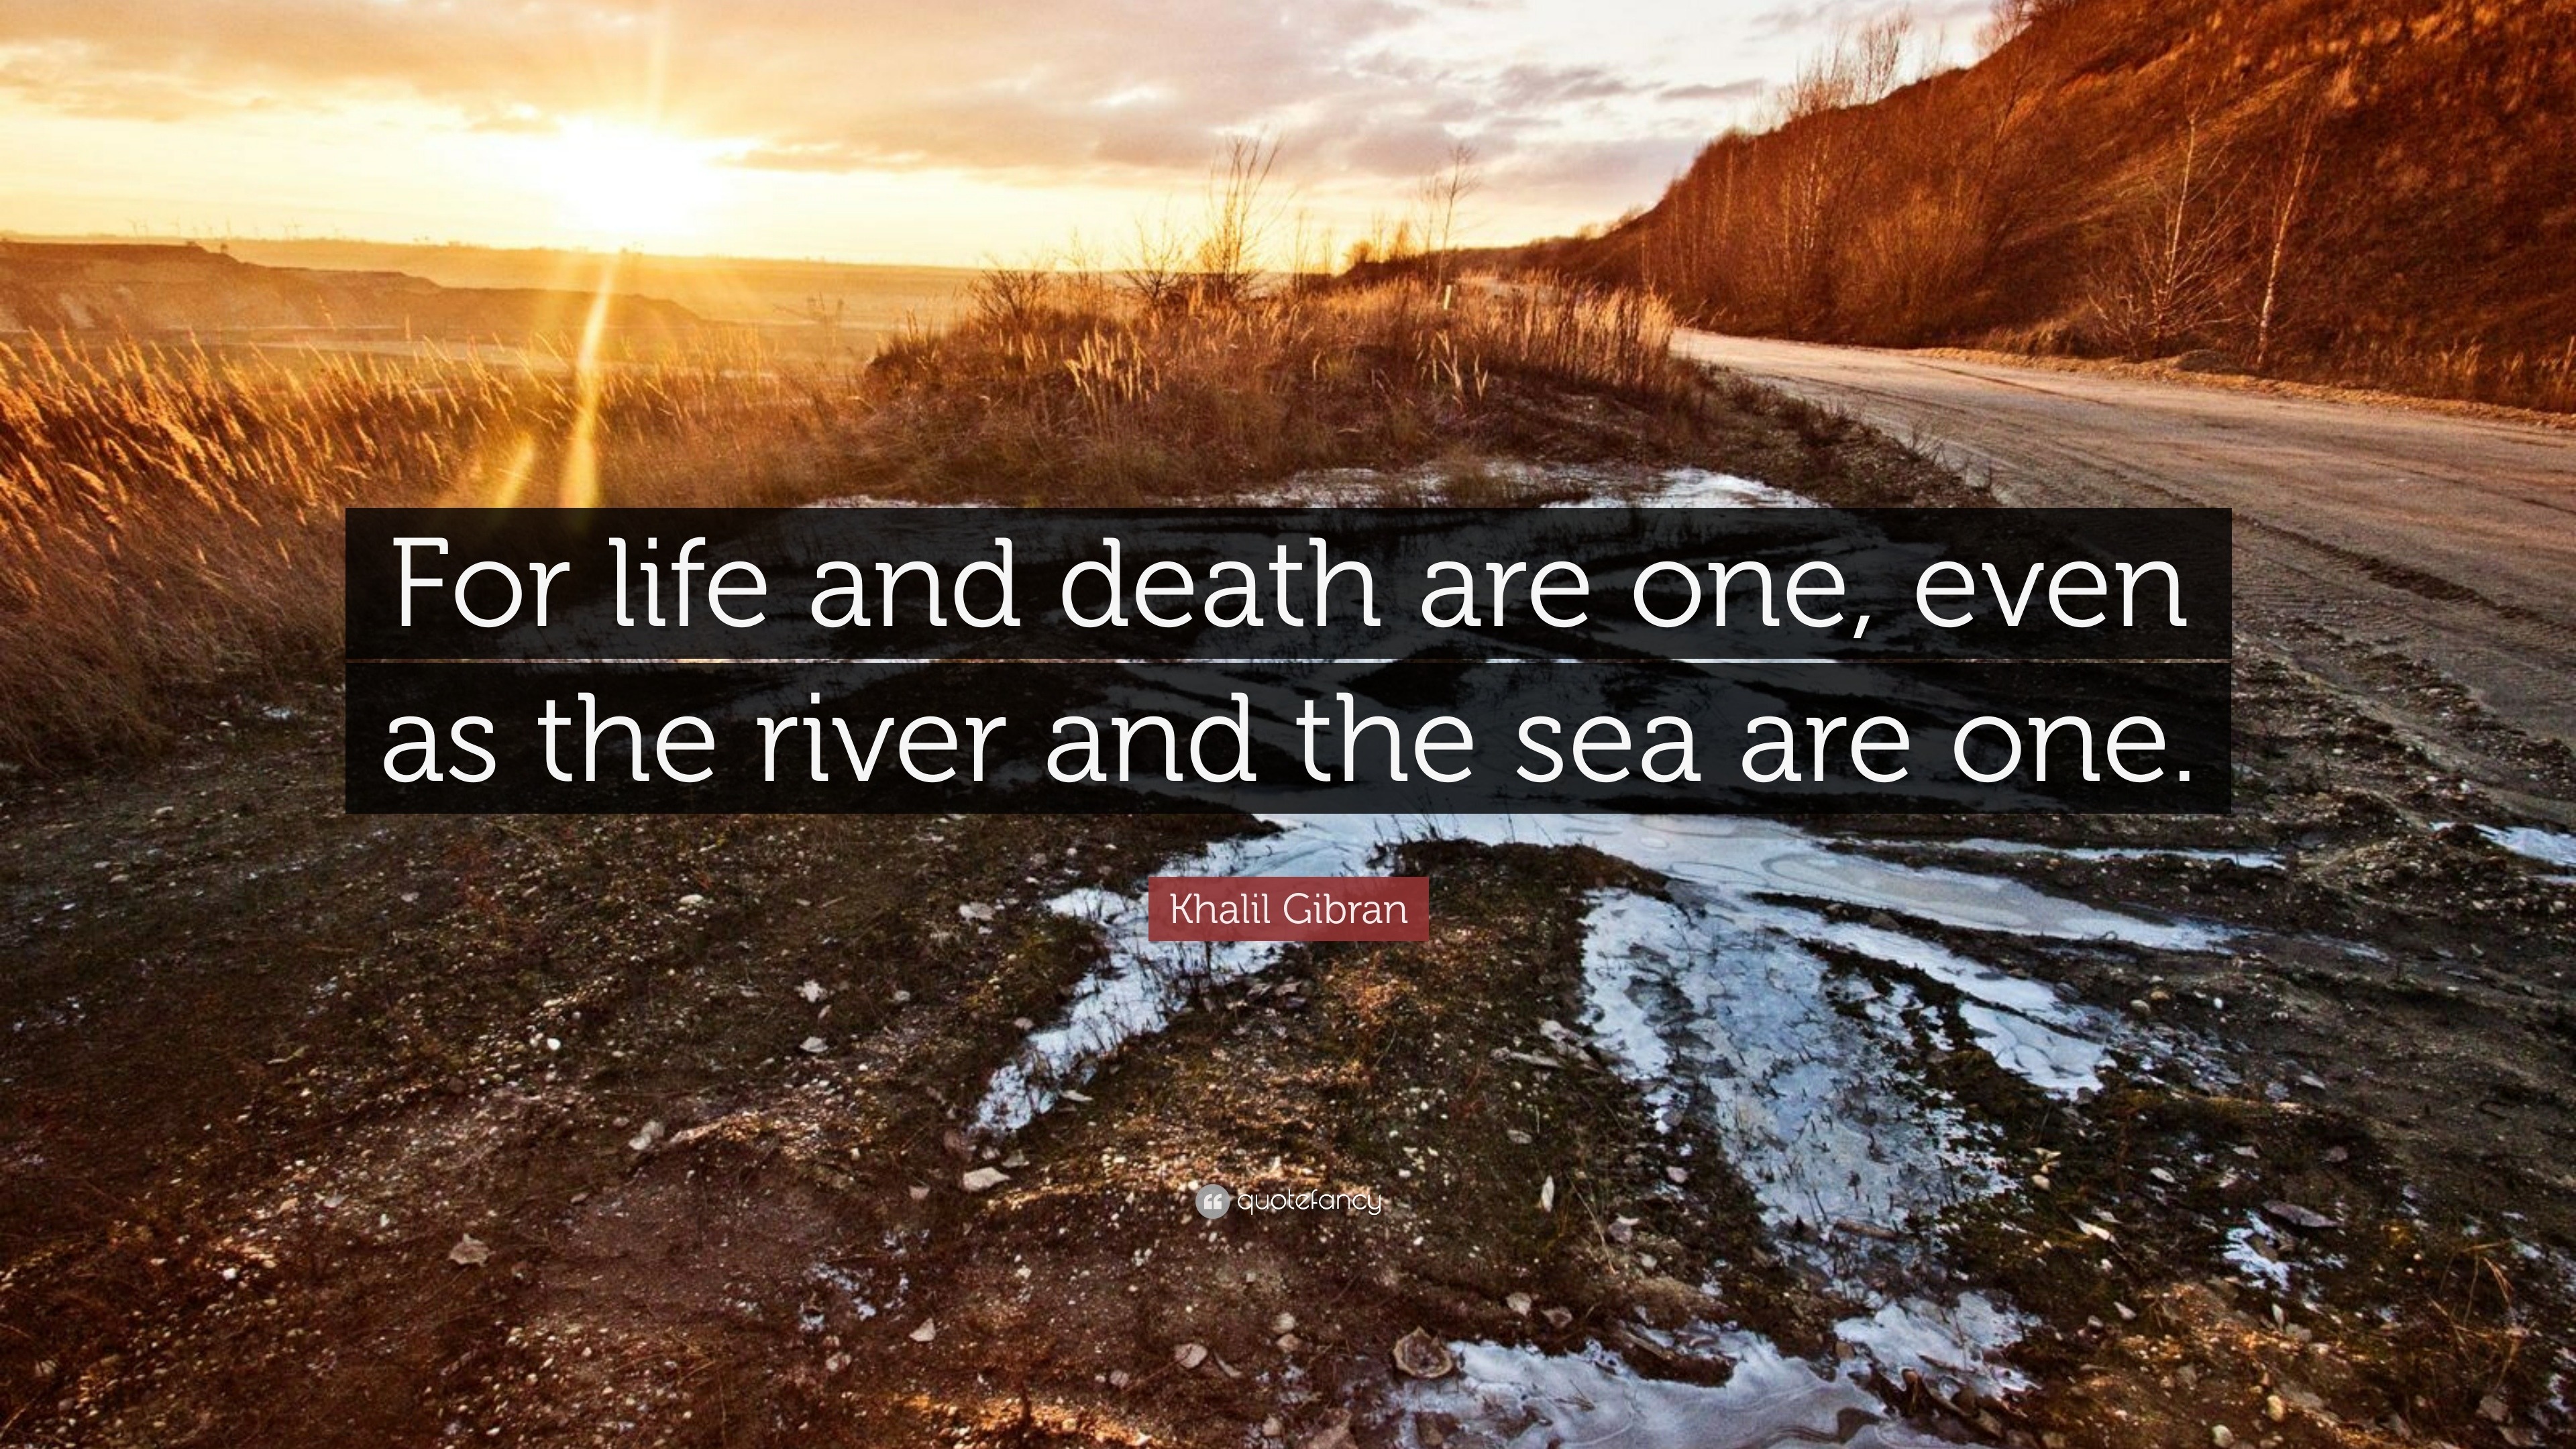 Khalil Gibran Quote “For life and are one even as the river